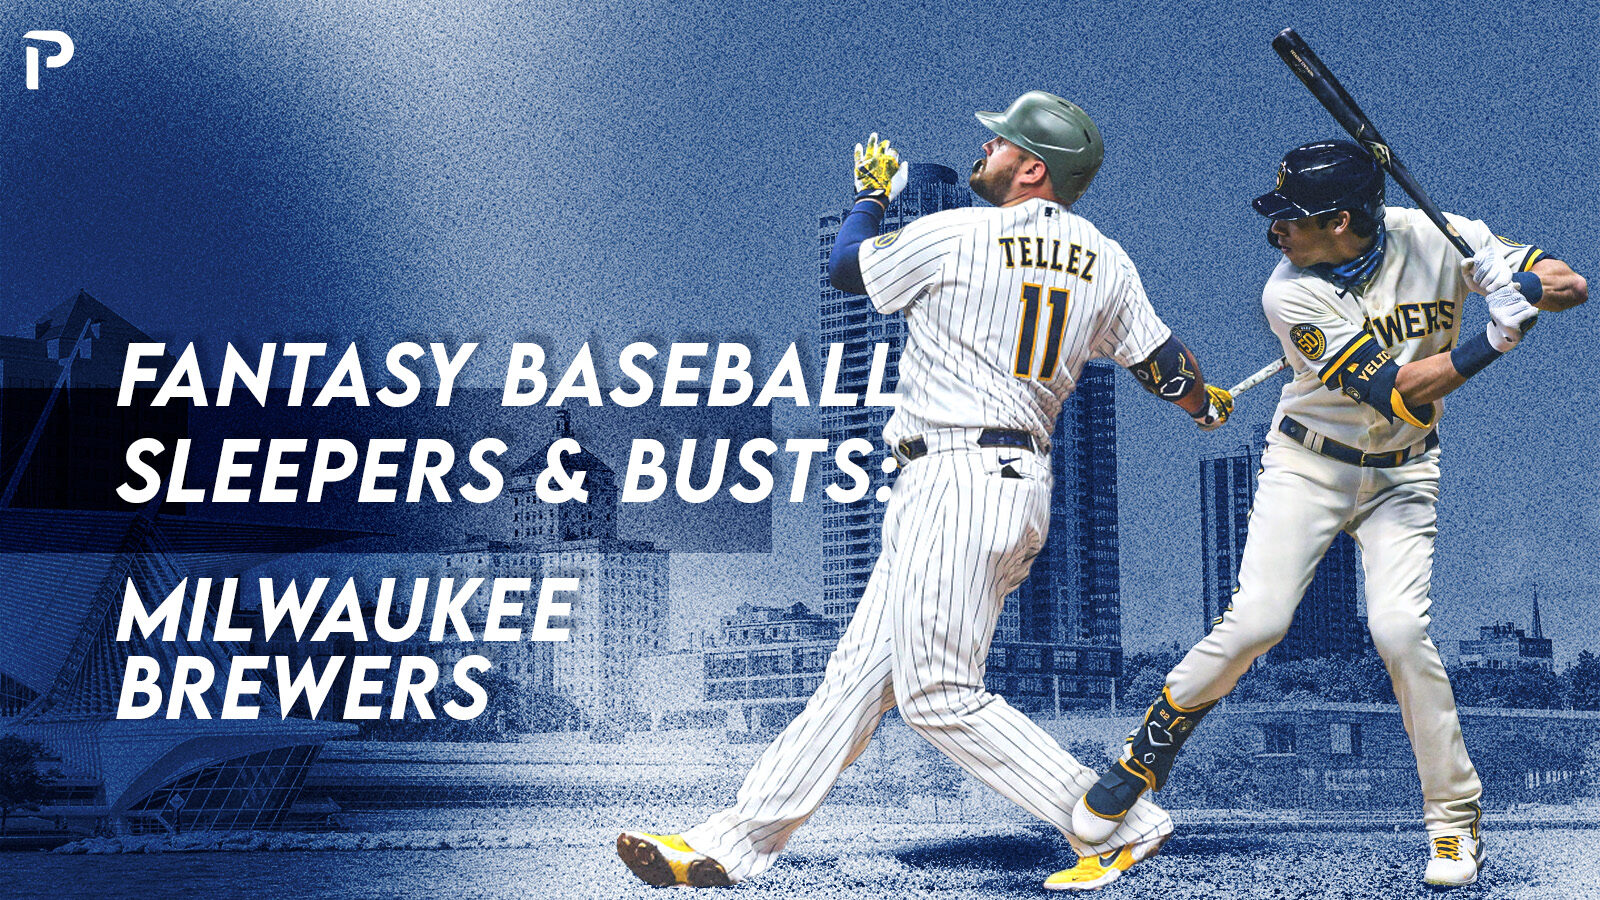 Quick scouting report on Milwaukee Brewers call-up Freddy Peralta